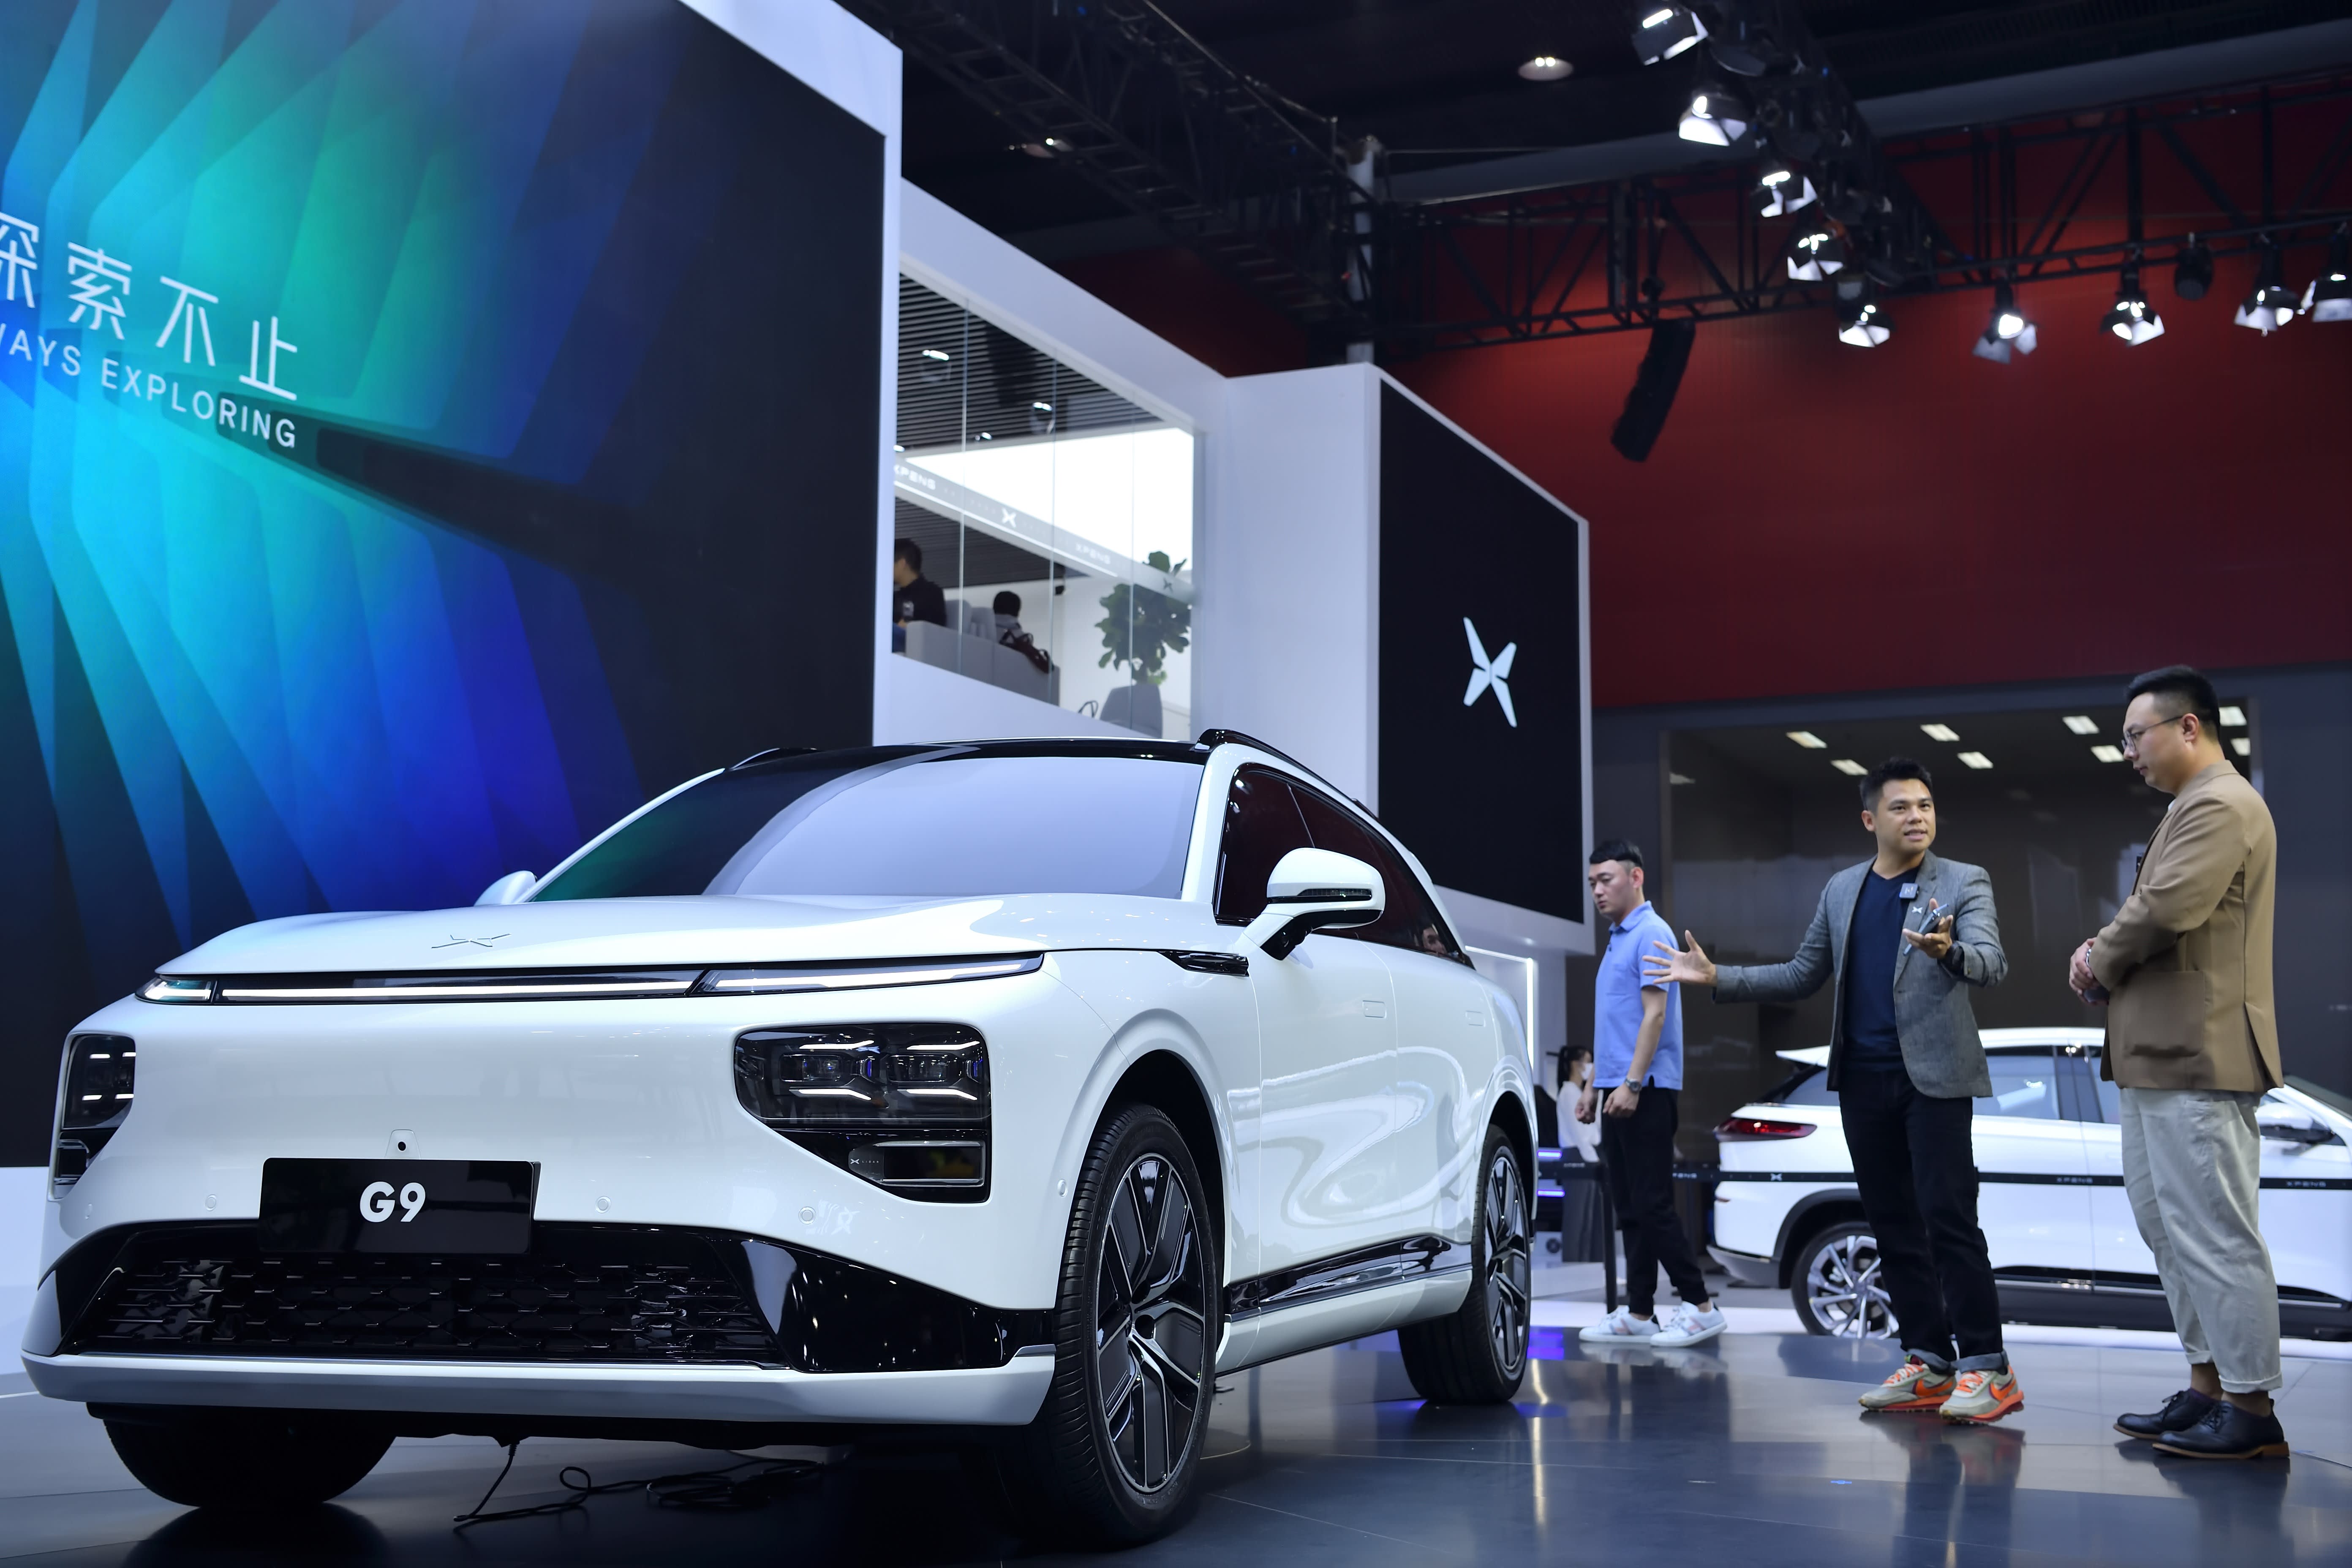 Morgan Stanley: Buy these 3 EV stocks to cash in on Beijing's auto sector boost